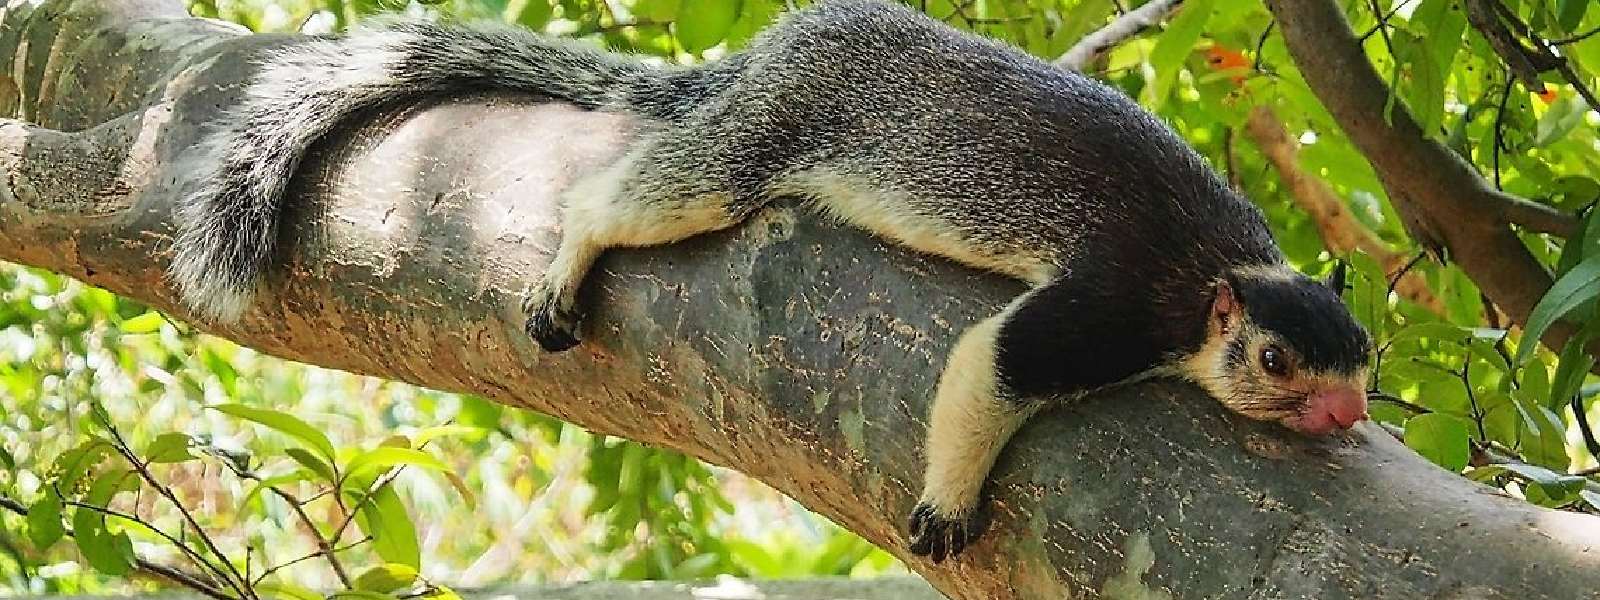 Sri Lanka to delist Grizzled Giant Squirrel as National Animal?